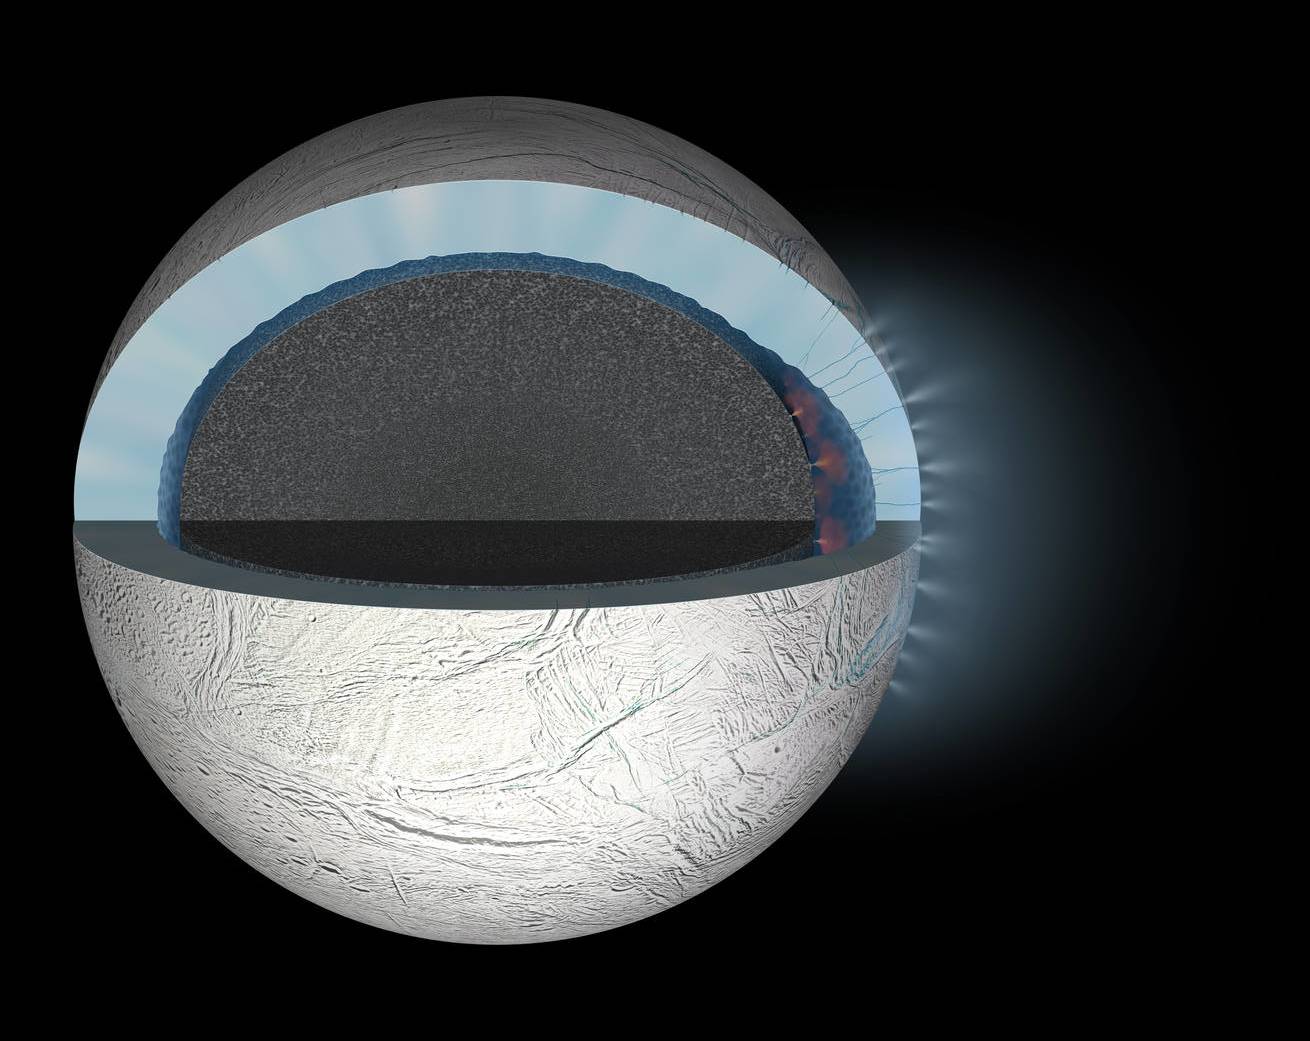 A render of Enceladus that shows the ocean of water as well as its erruptions.